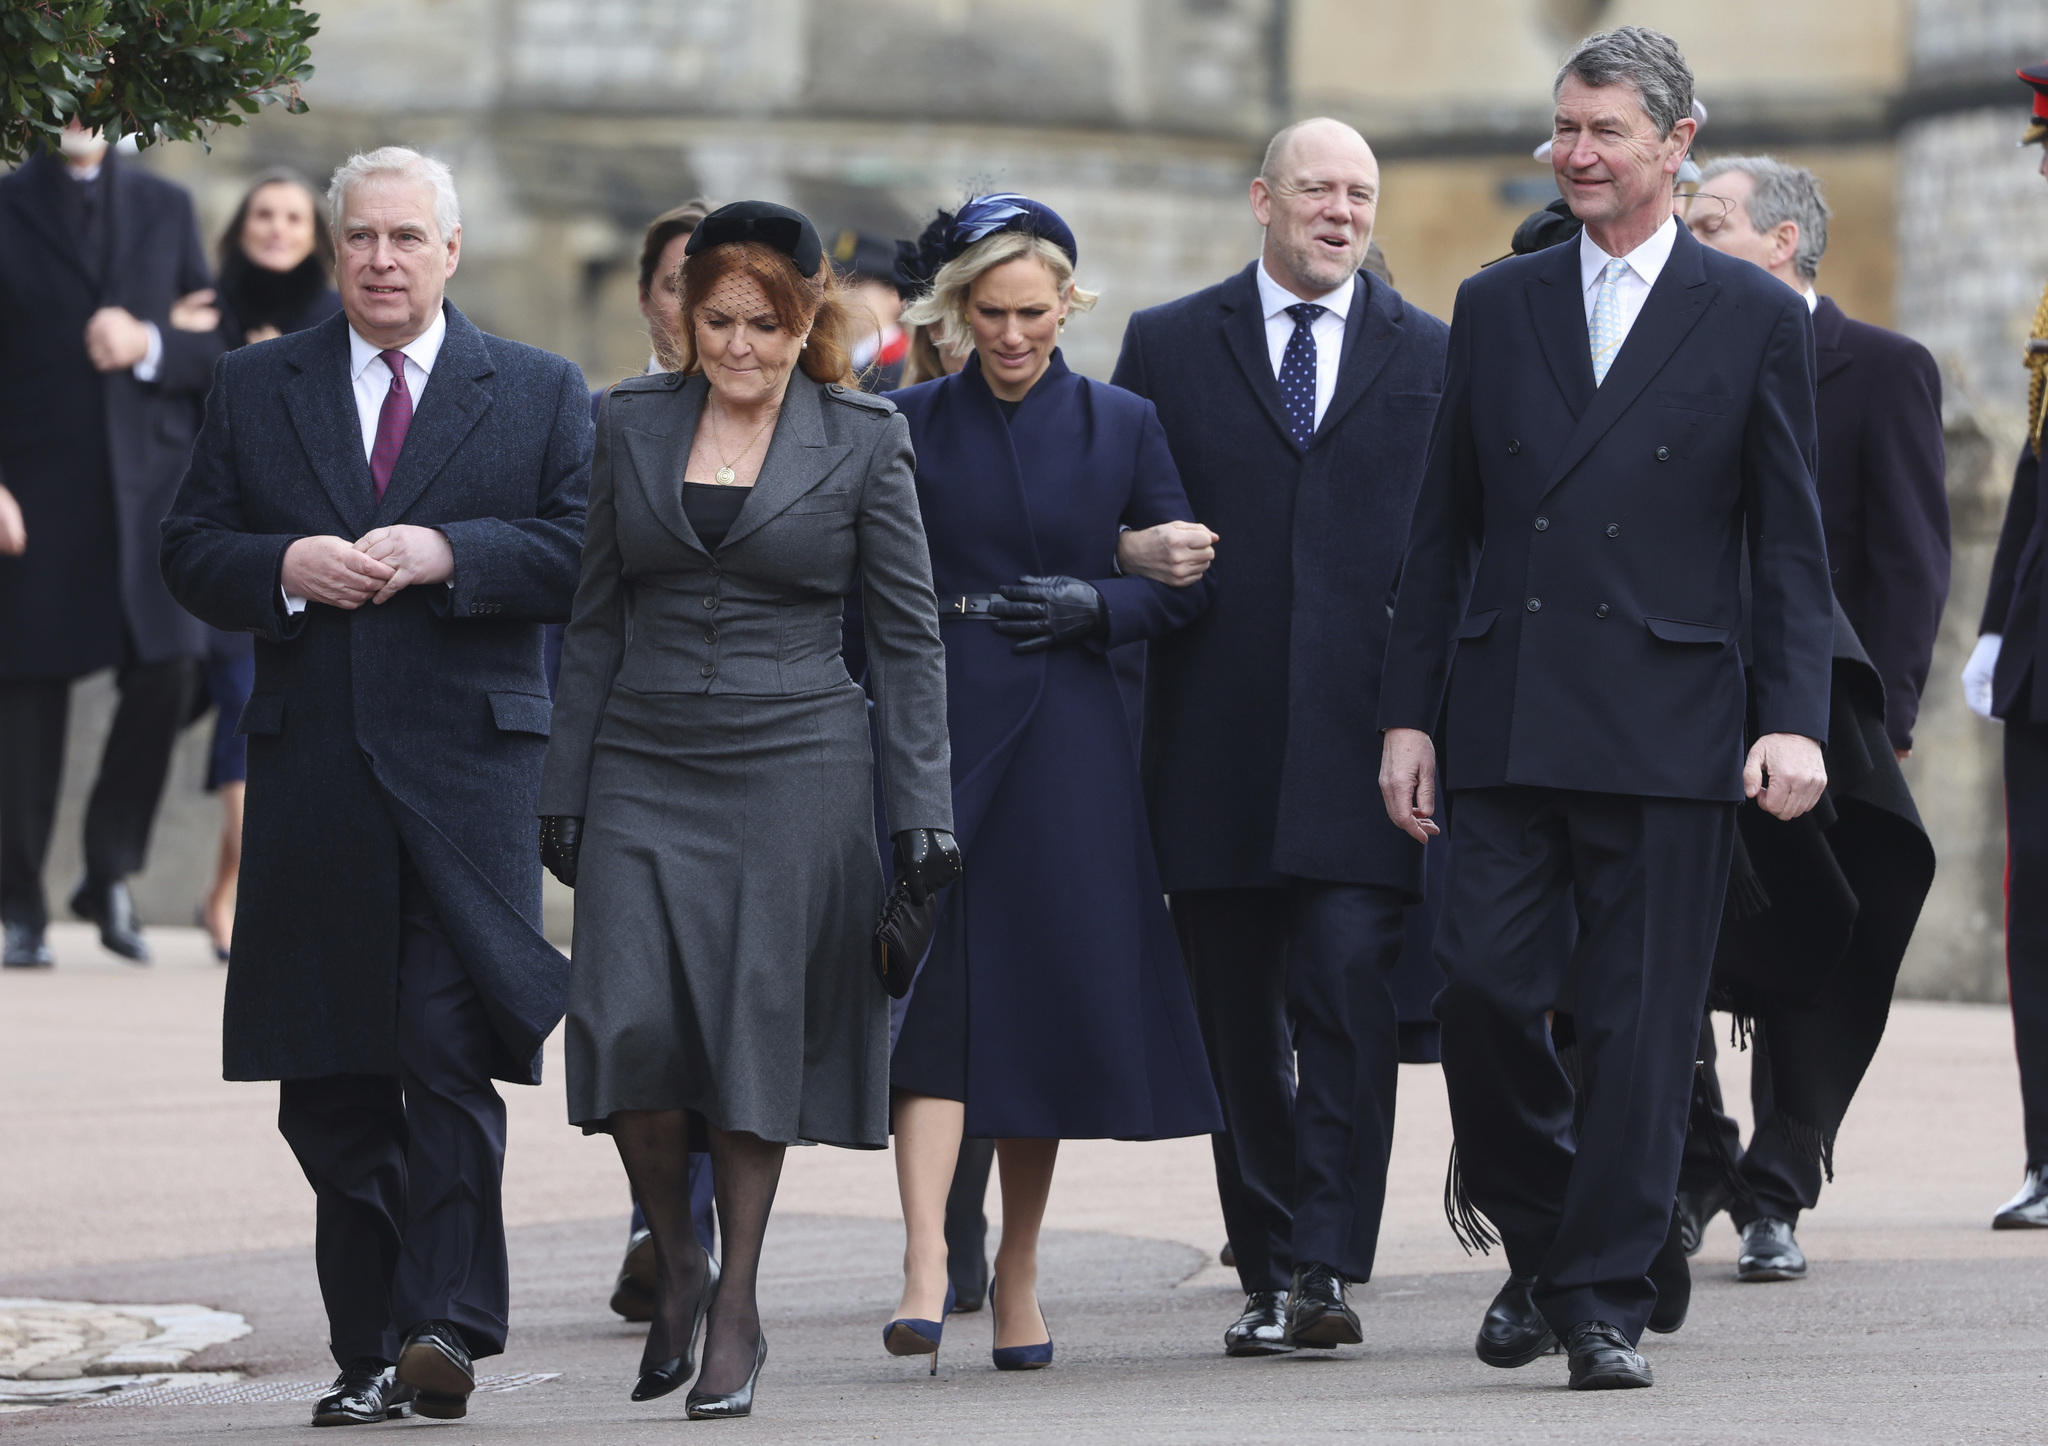 Prince Andrew, Mike Tindall, Sarah, Duchess of York, Anne, Princess Royal and Vice Admiral Sir Timothy Laurence attend the Thanksgiving Service for King Constantine